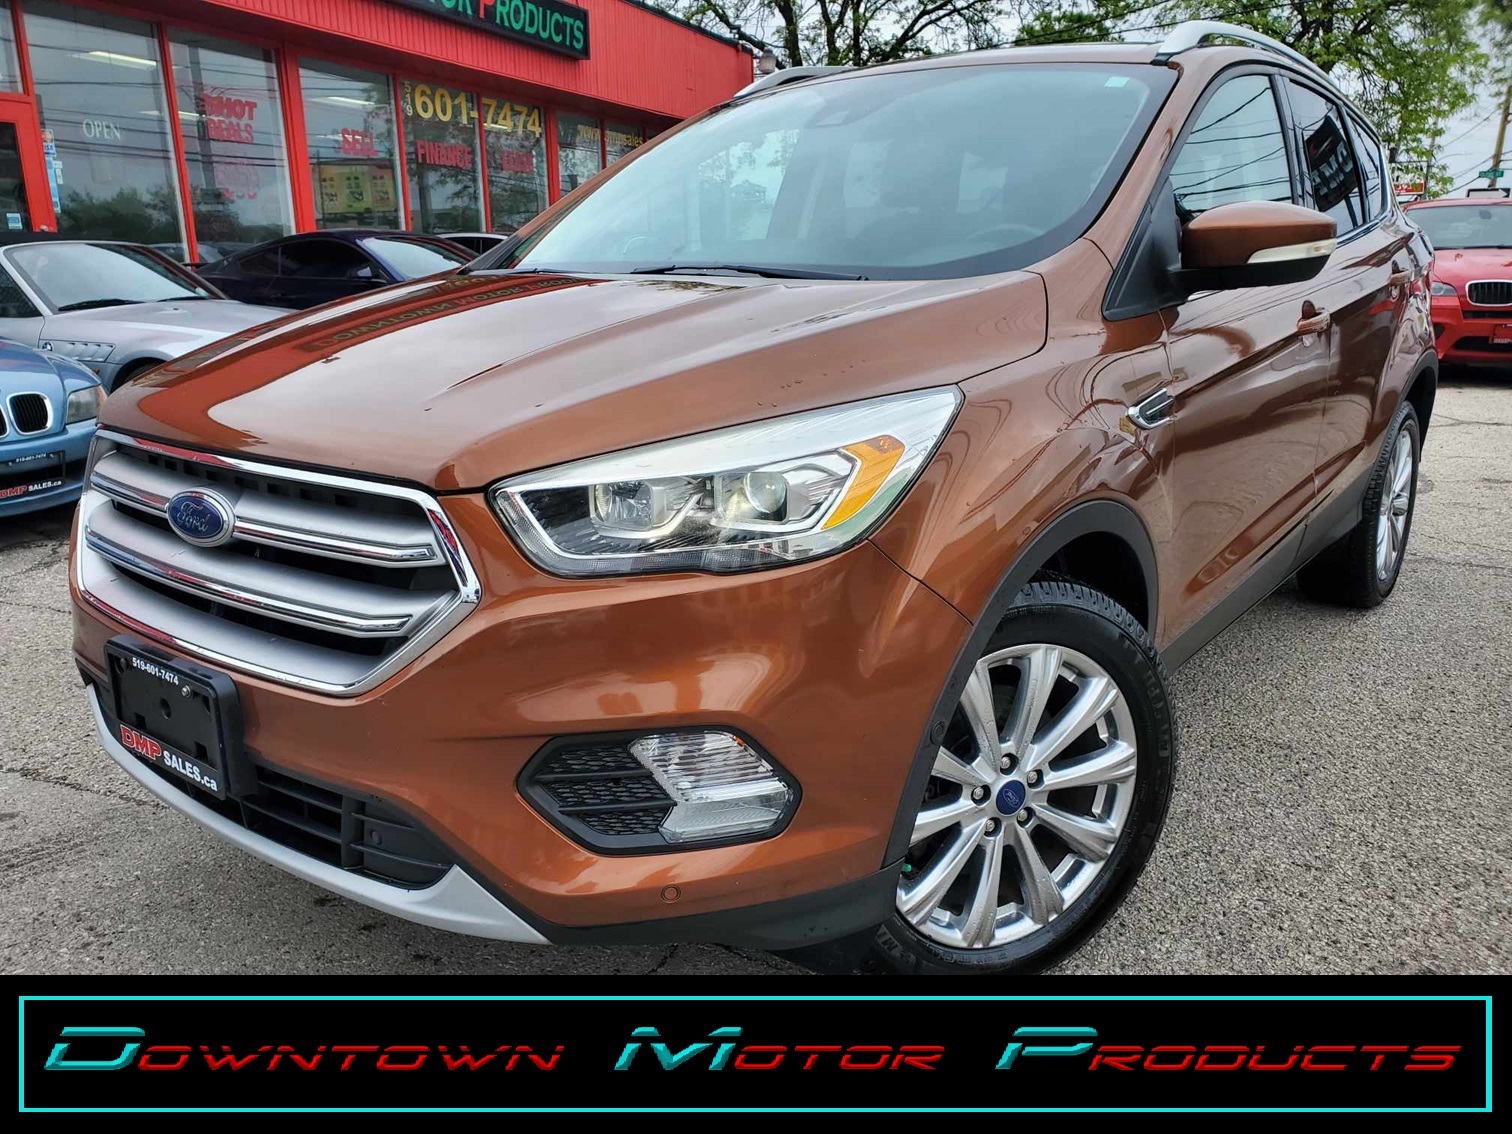 2017 Ford Escape Titanium 4WD *Nav / Panoroof / Leather / Rear Cam*